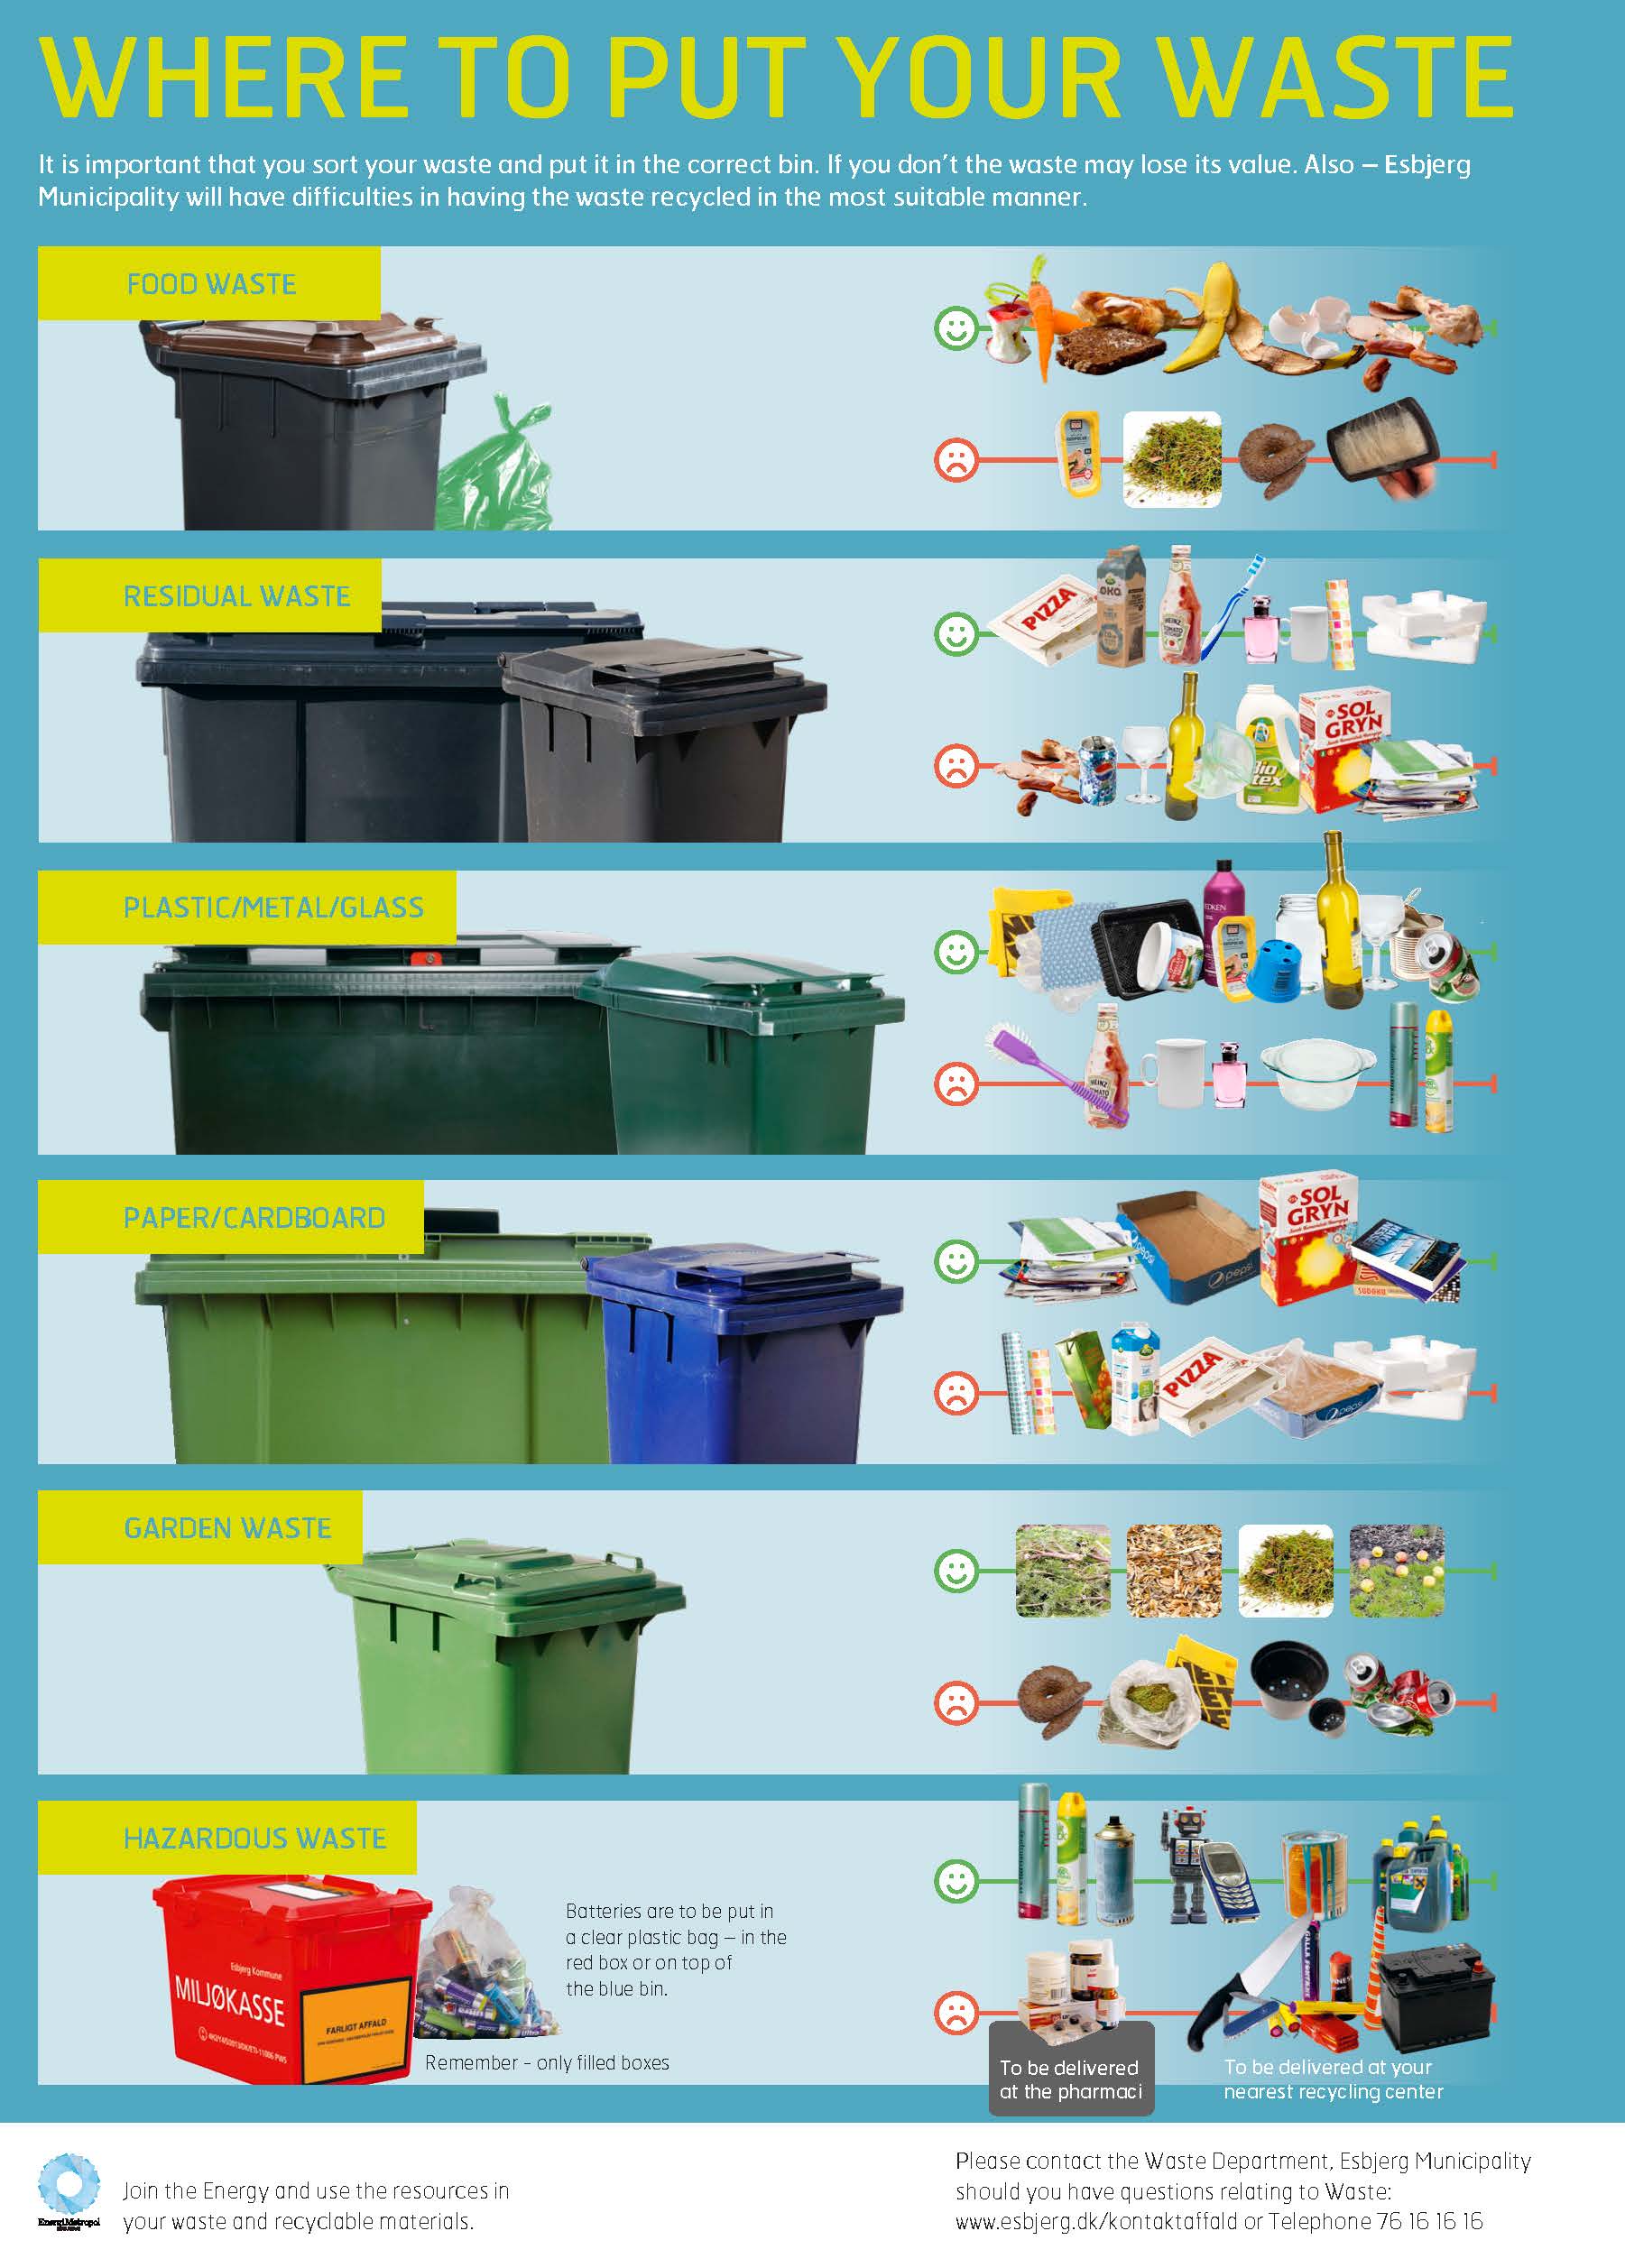 Overview poster of where to put waste - described in text on the page too